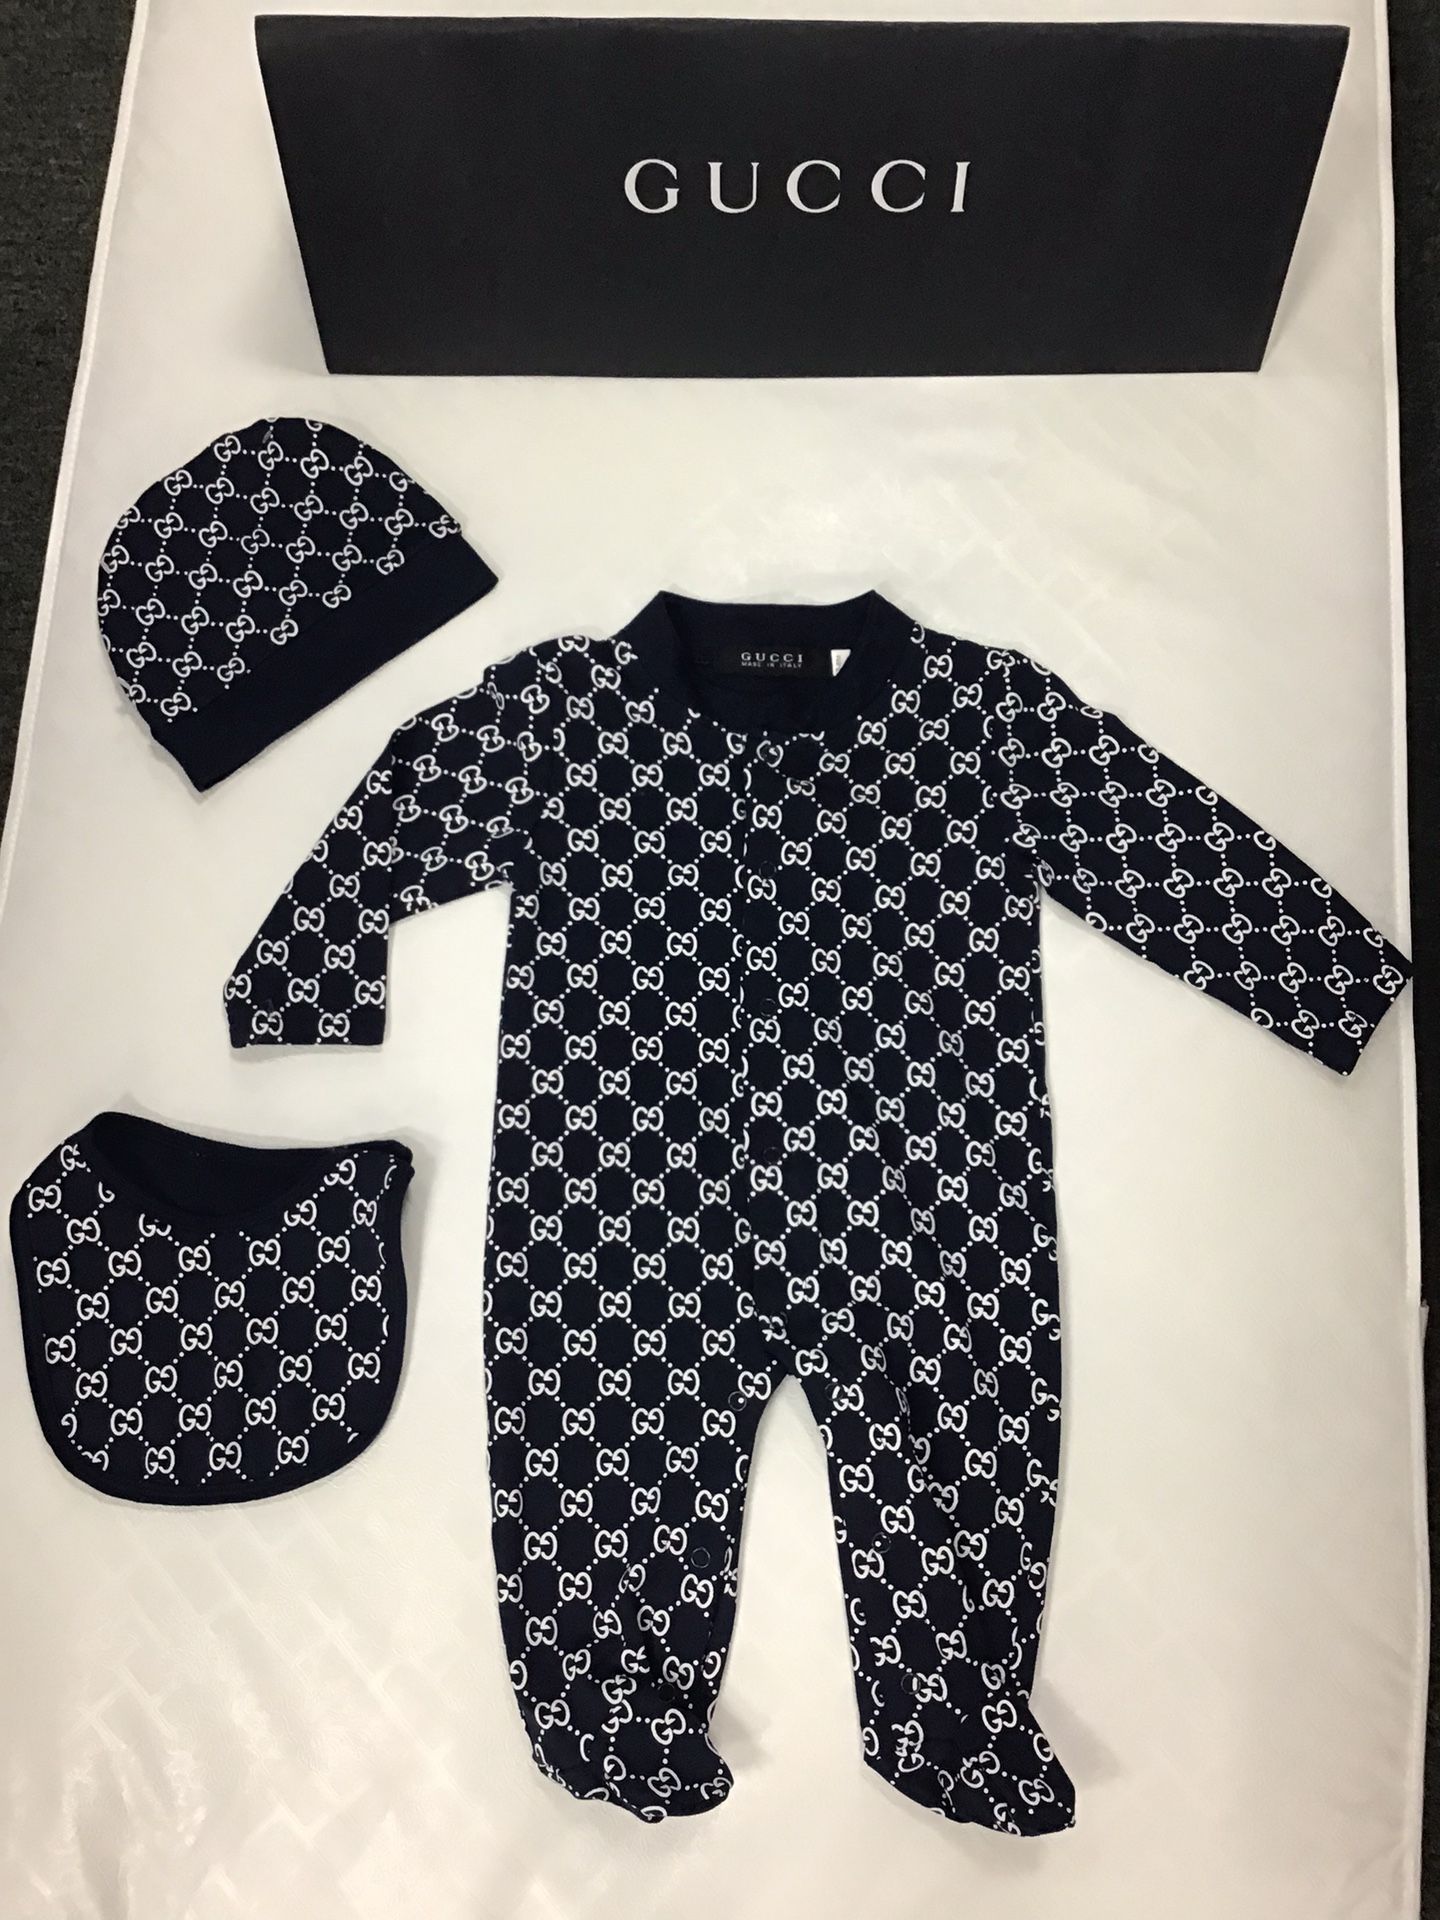 New With Tags Designer Baby Gucci 3 Piece Monogramed Footsie Pajama Set $200